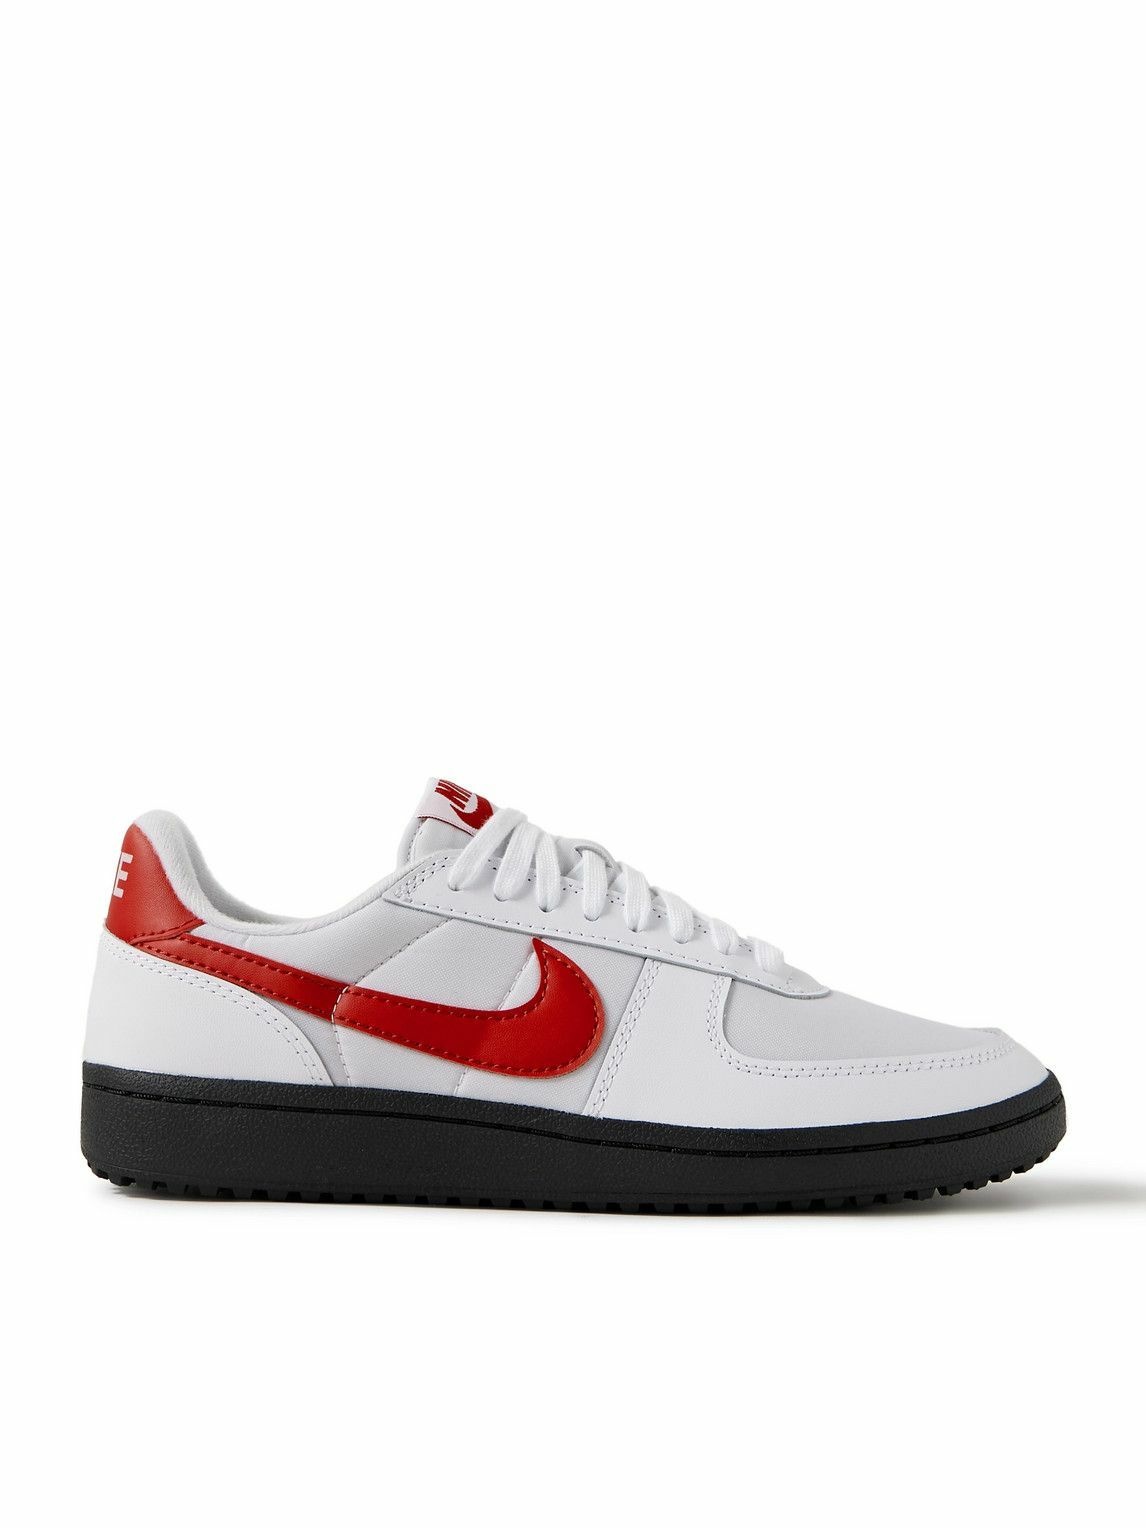 Photo: Nike - Field General 82 Mesh and Leather Sneakers - White